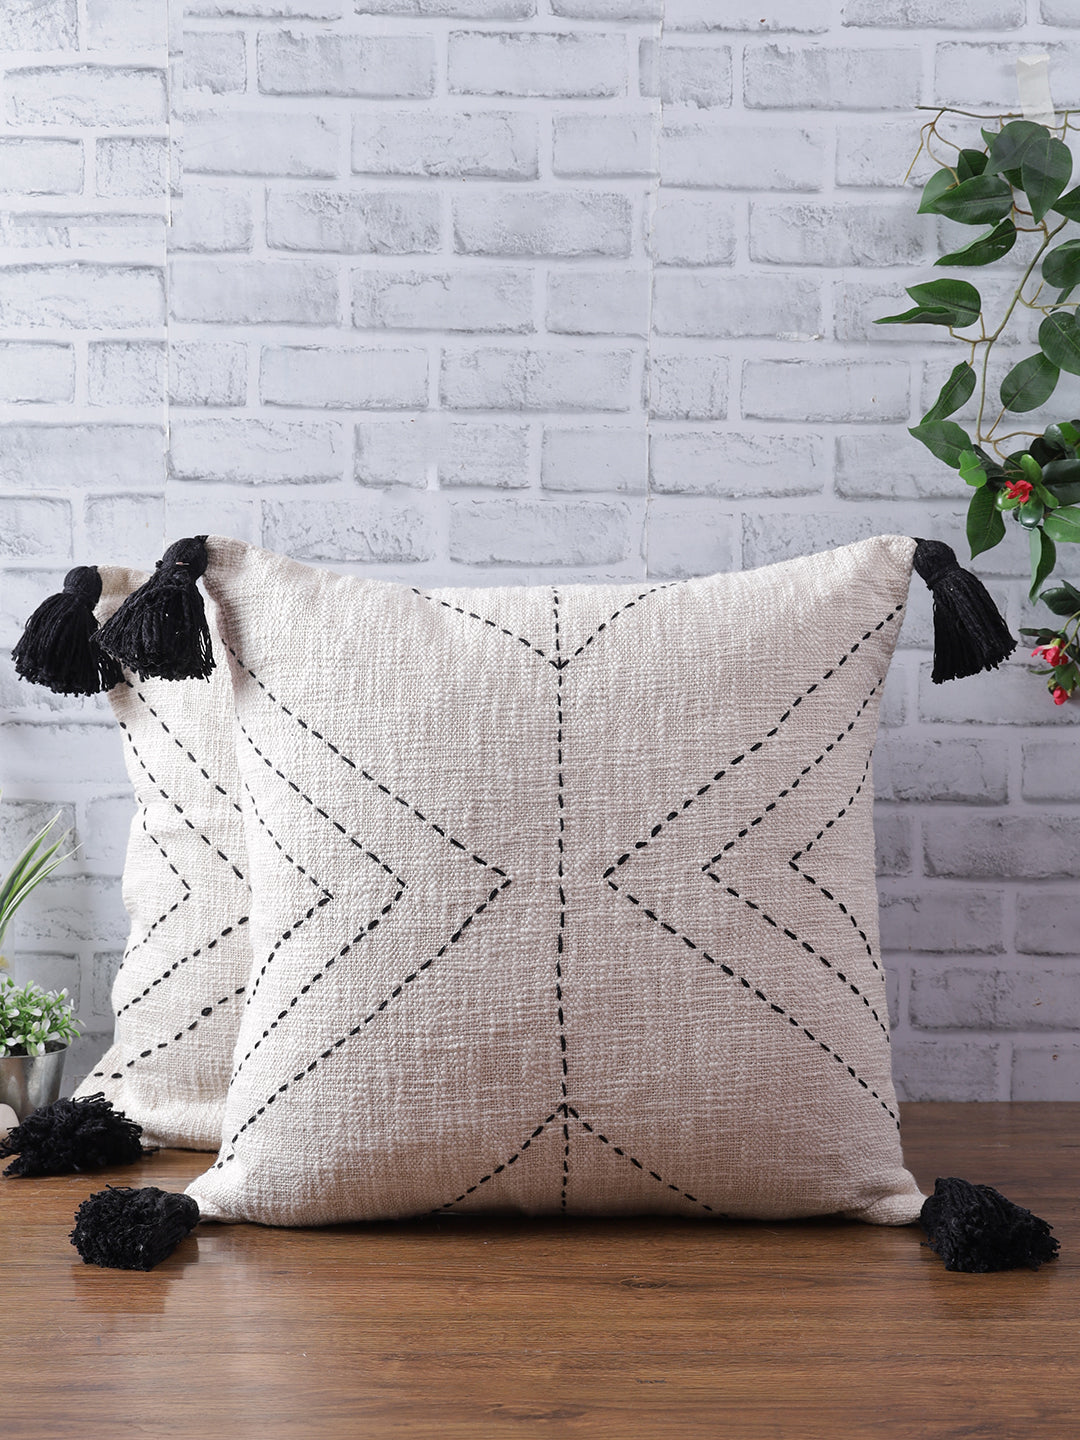 Set of 2 Handwoven Cotton Cushion Cover with tassels